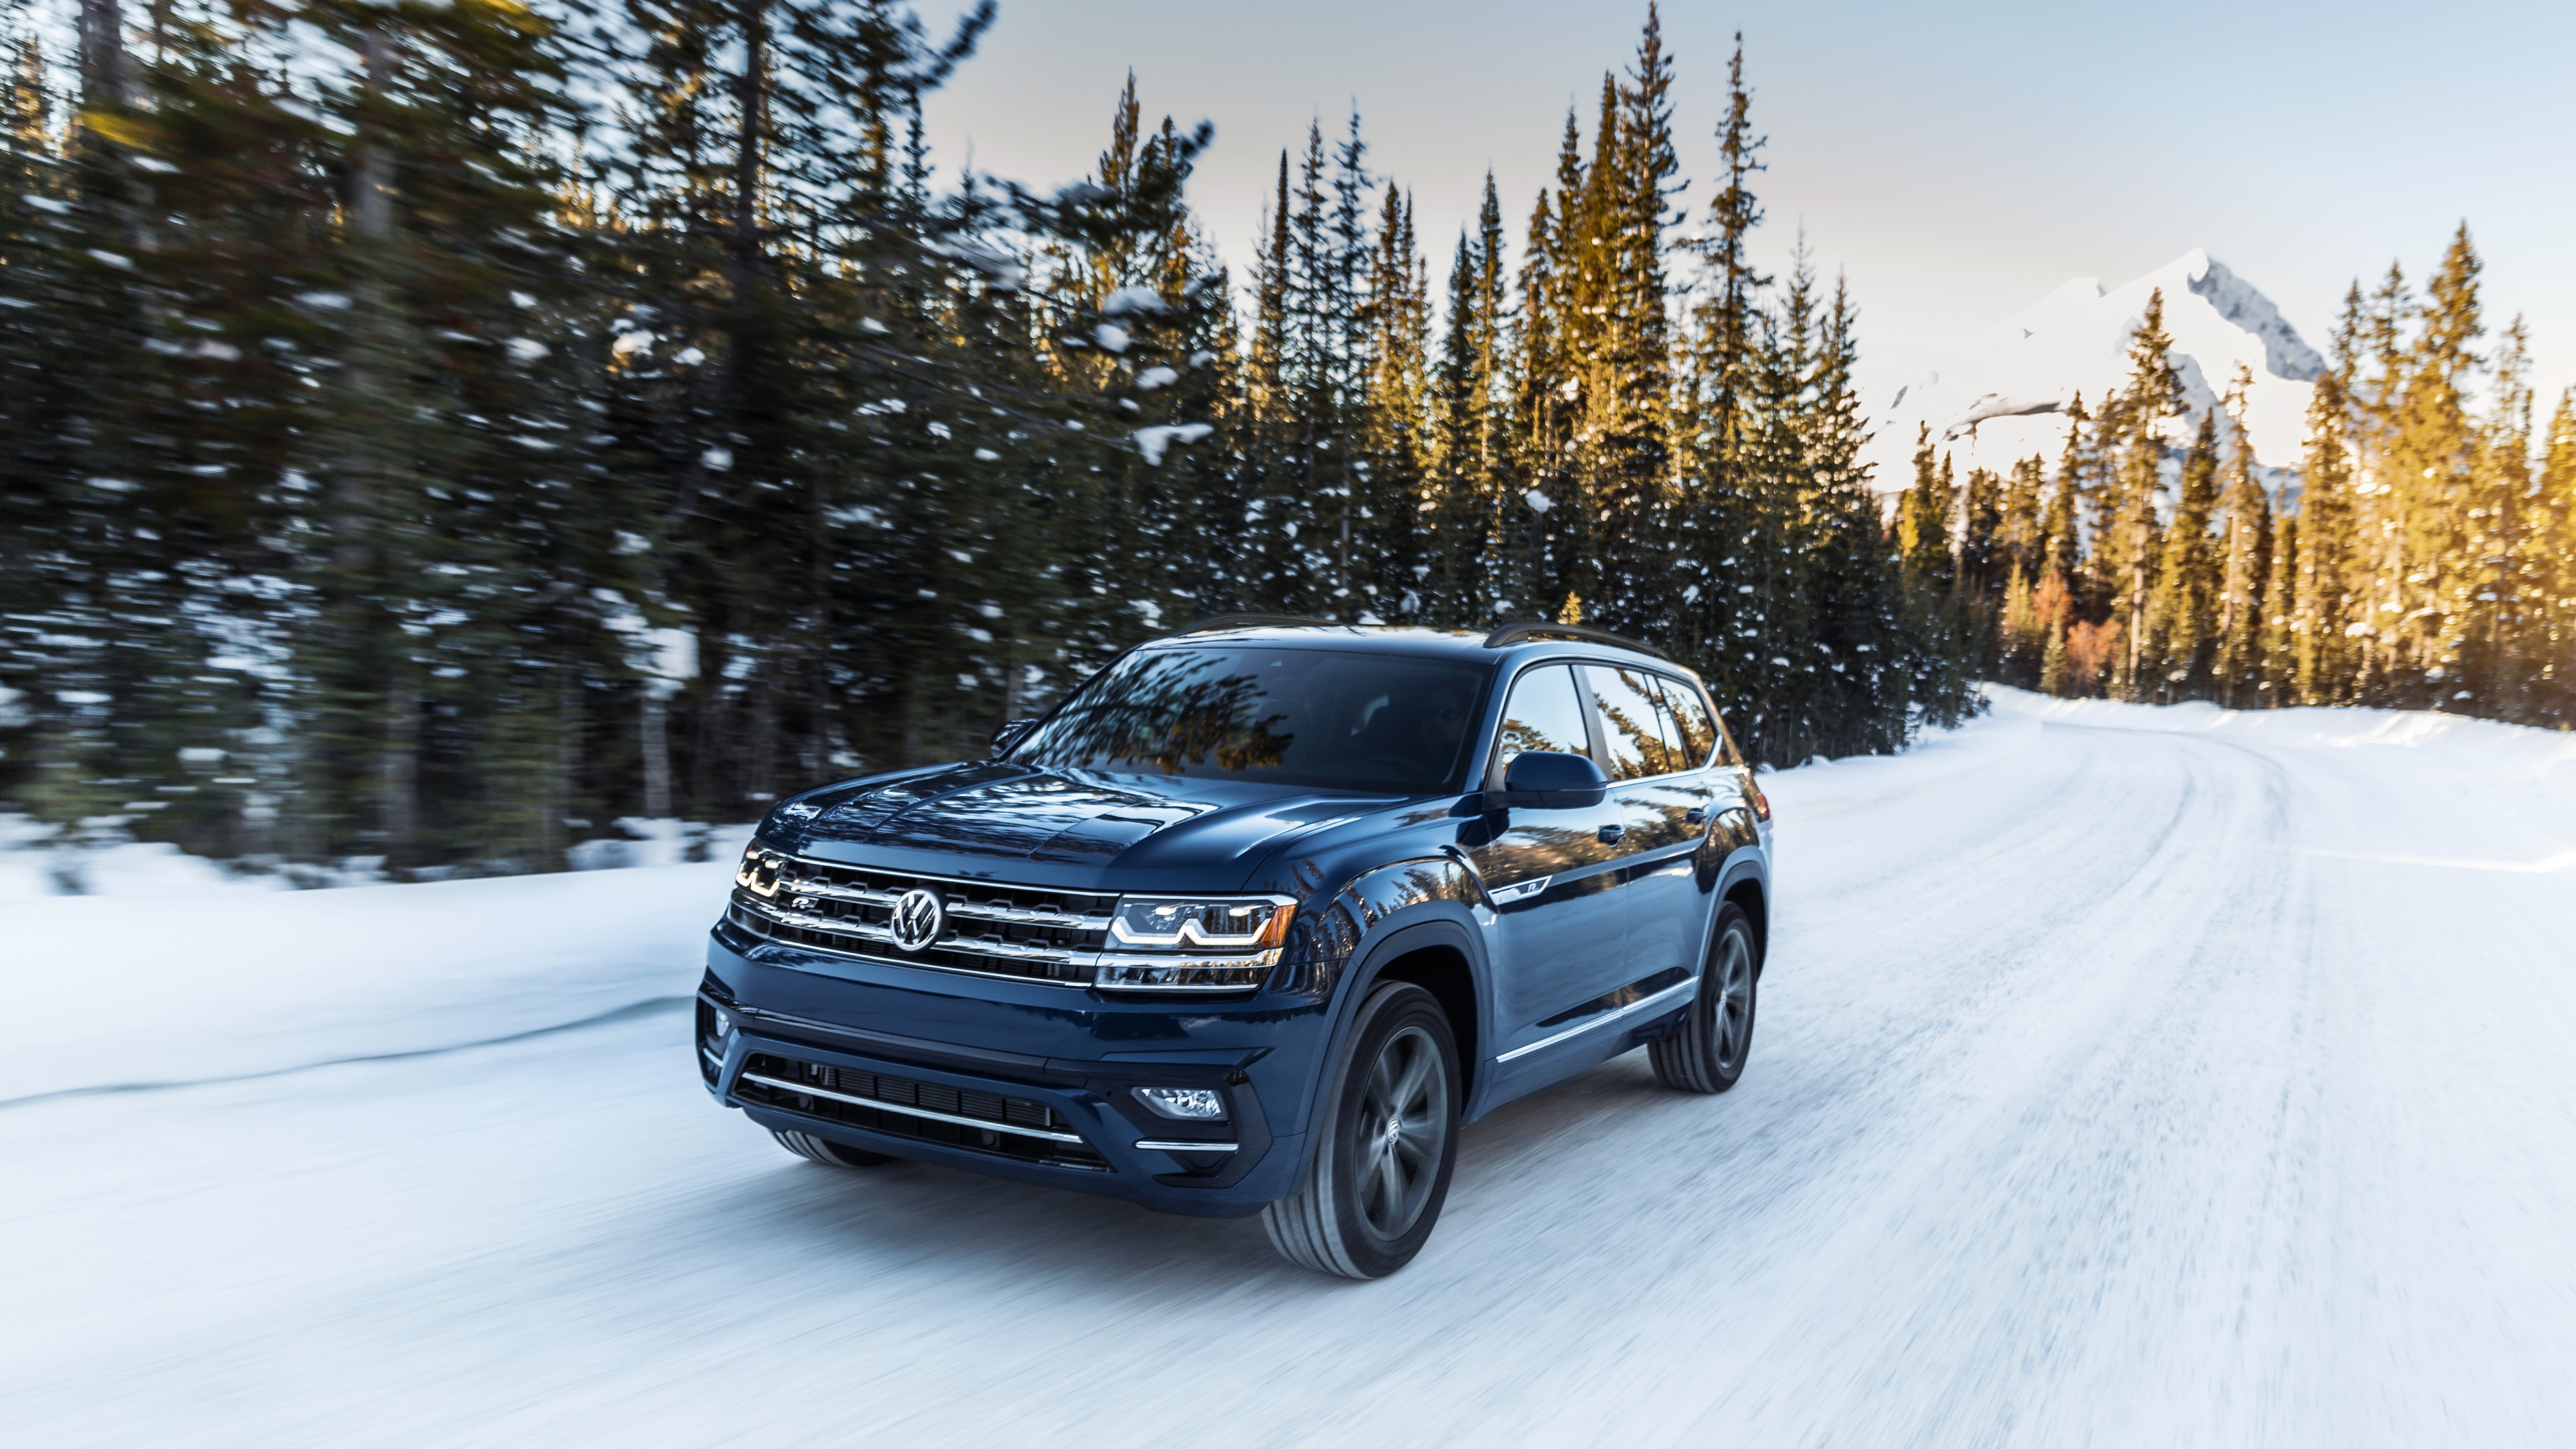 VW SUV driving in the winter